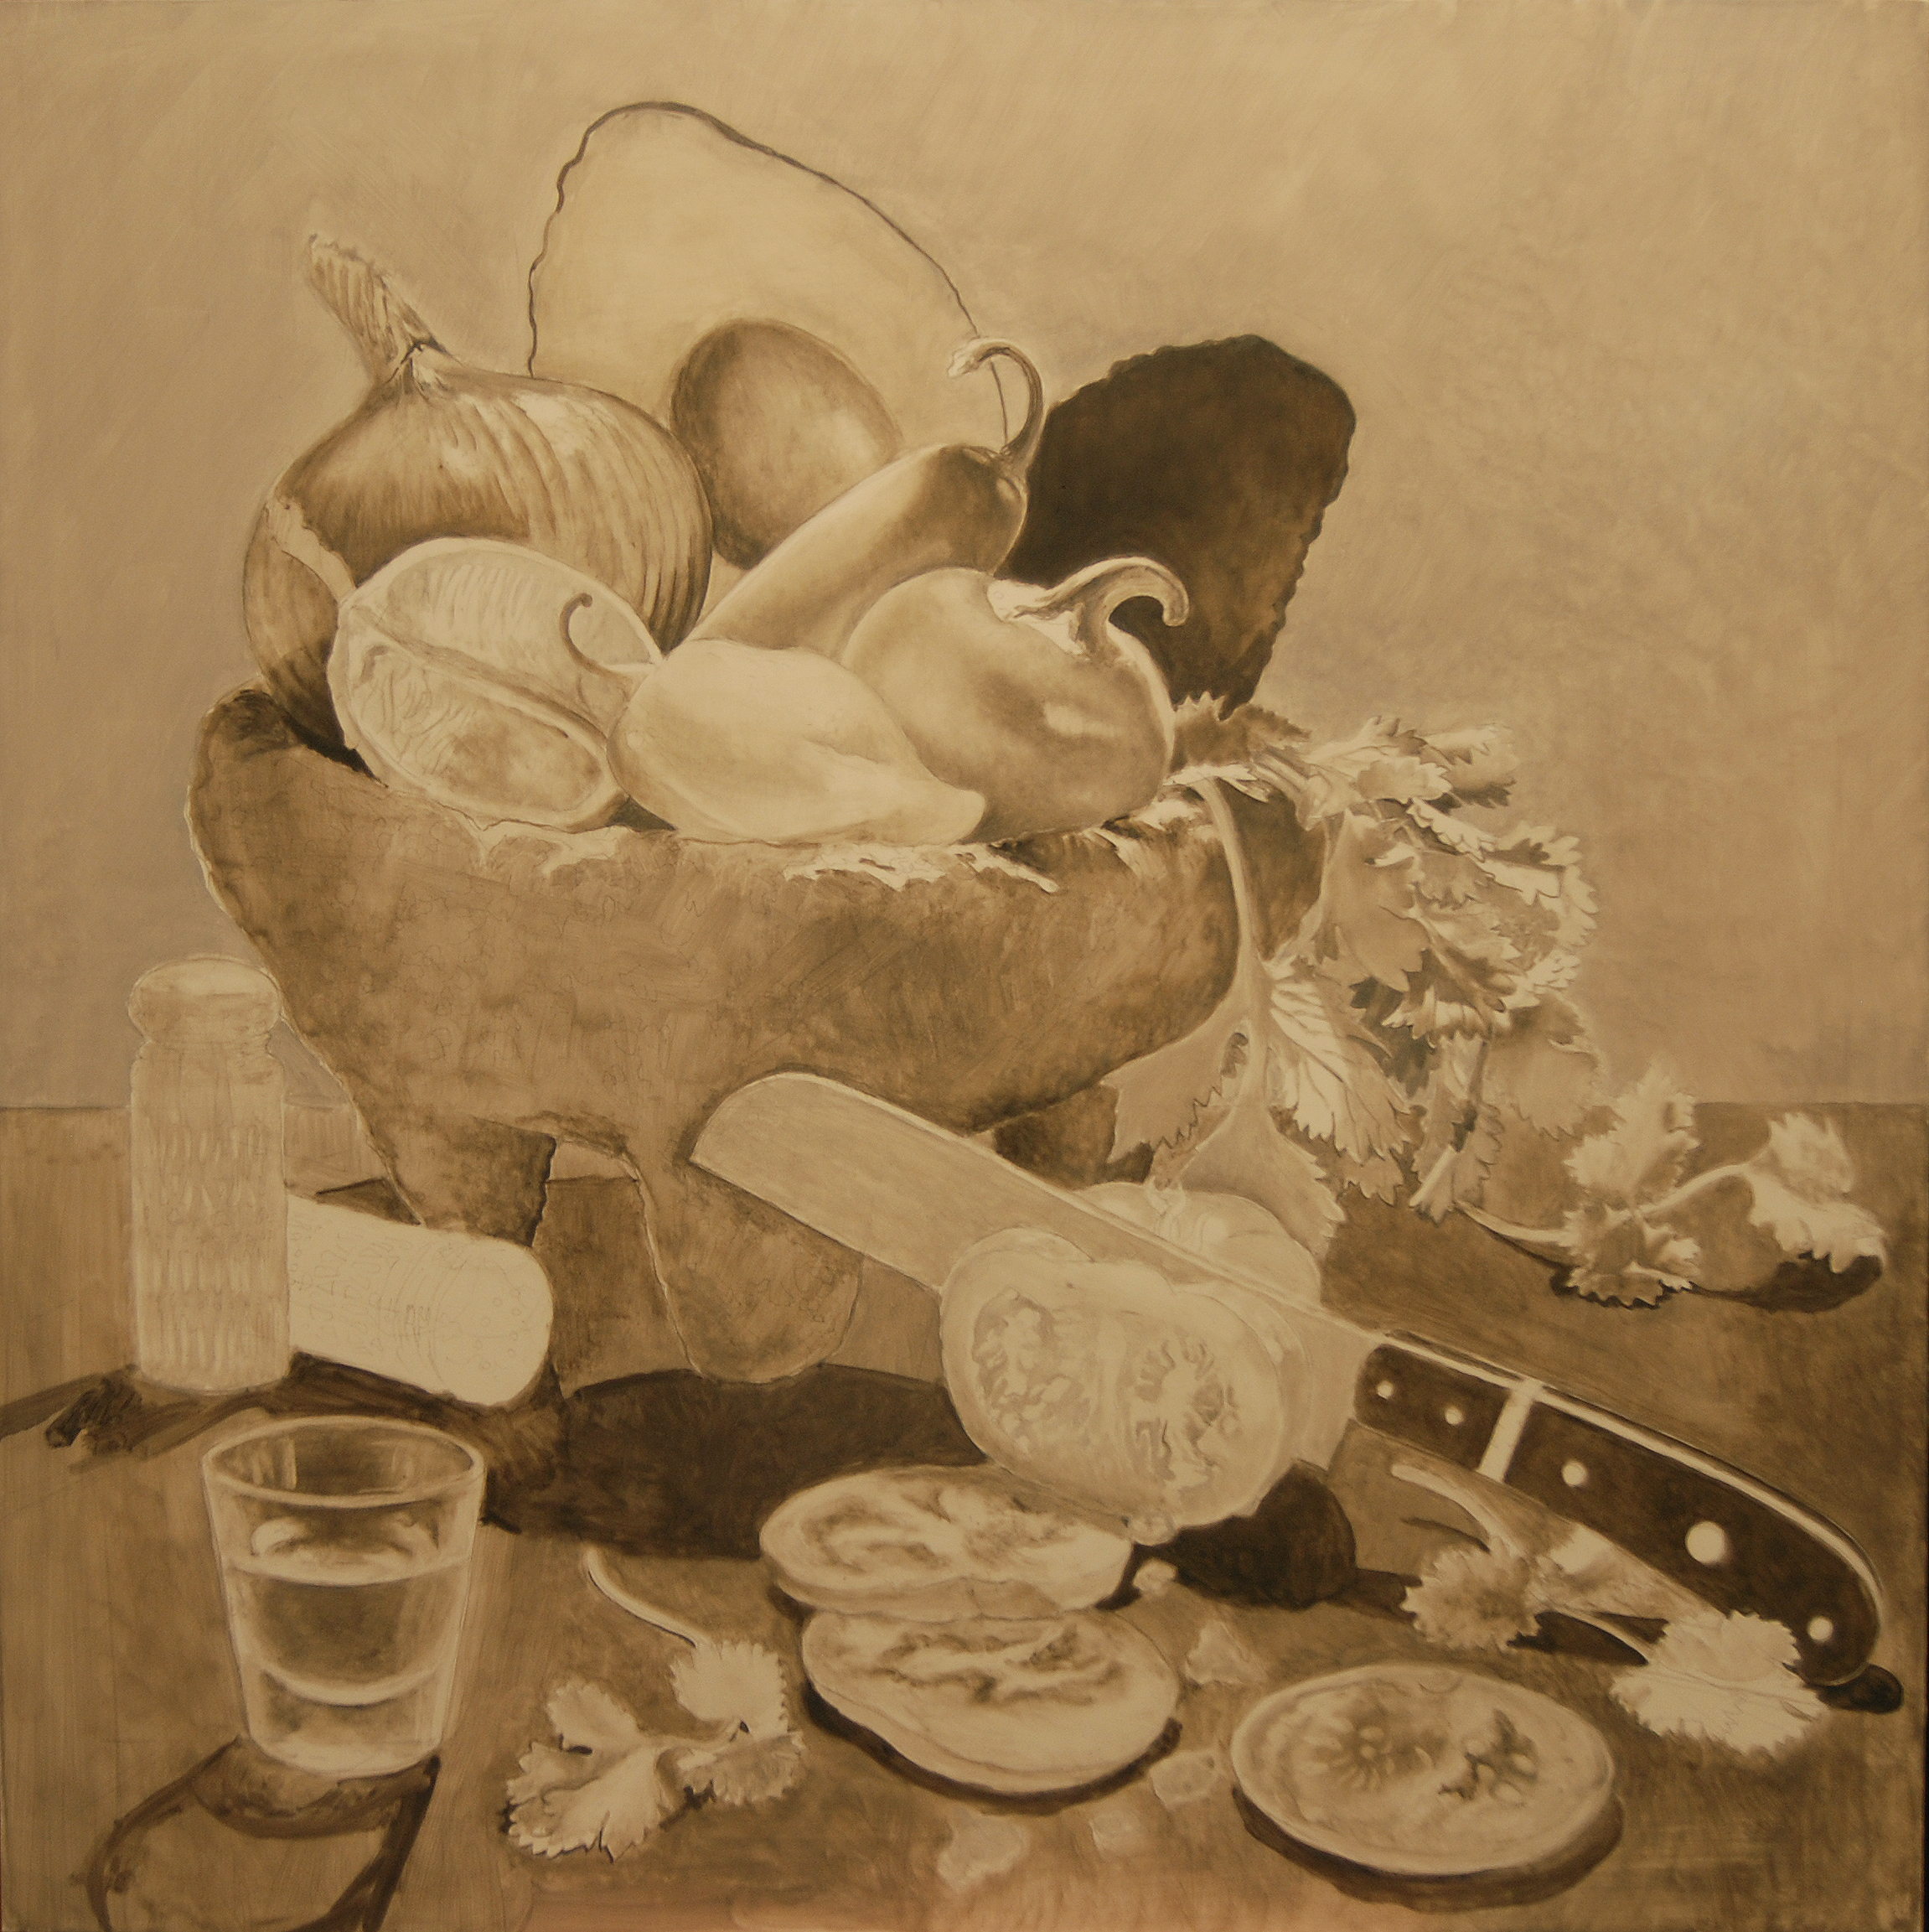 The grisaille technique for the still life commission